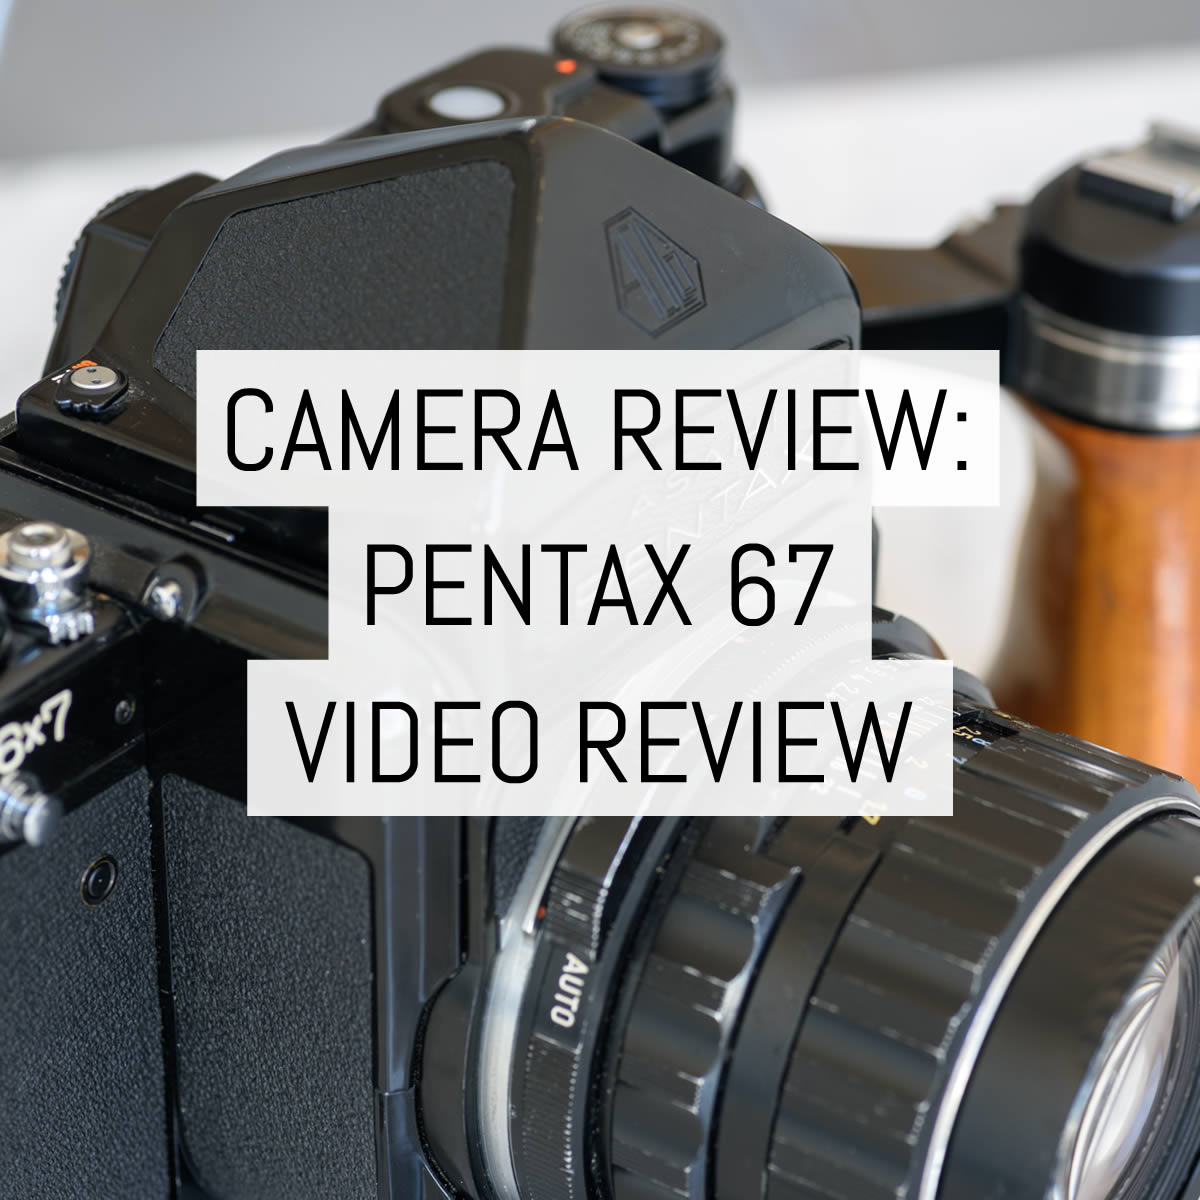 Camera review: The Pentax 67